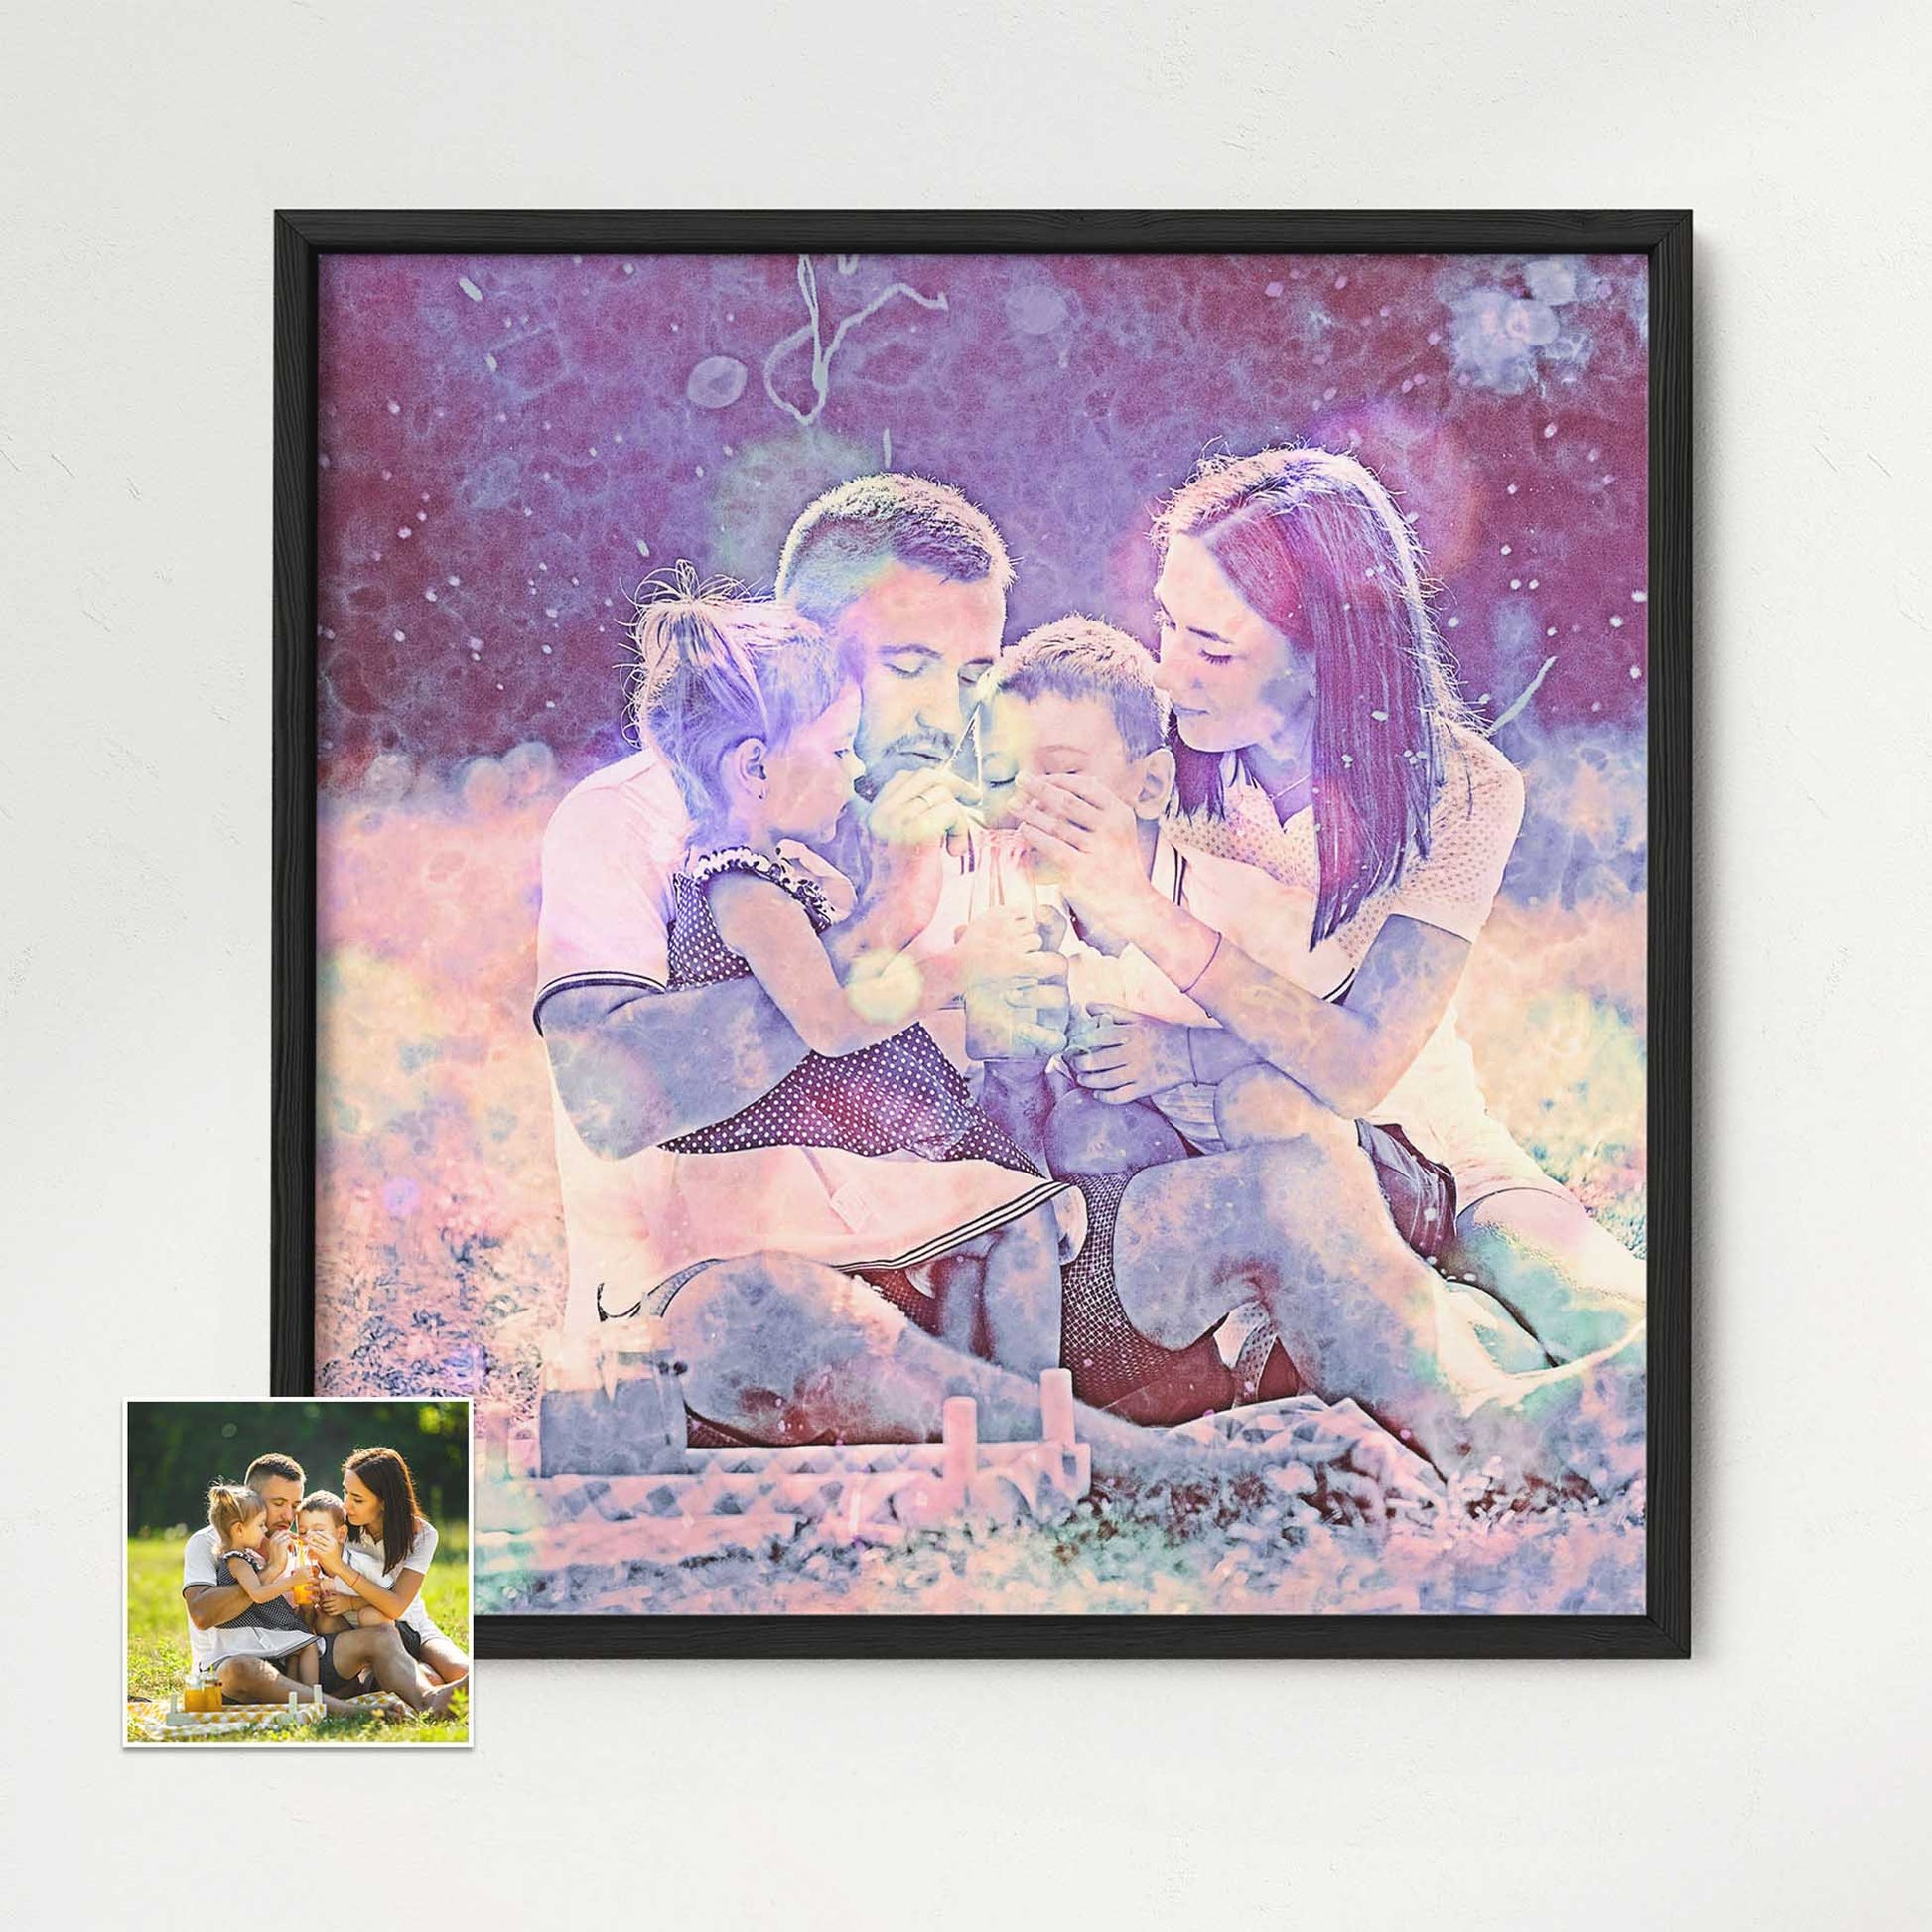 Personalised Special Purple FX Framed Print: Elevate your home decor with this captivating artwork. The beautiful colors and bokeh effect create a mesmerizing visual appeal. Crafted on gallery-quality paper and encased in a wooden frame